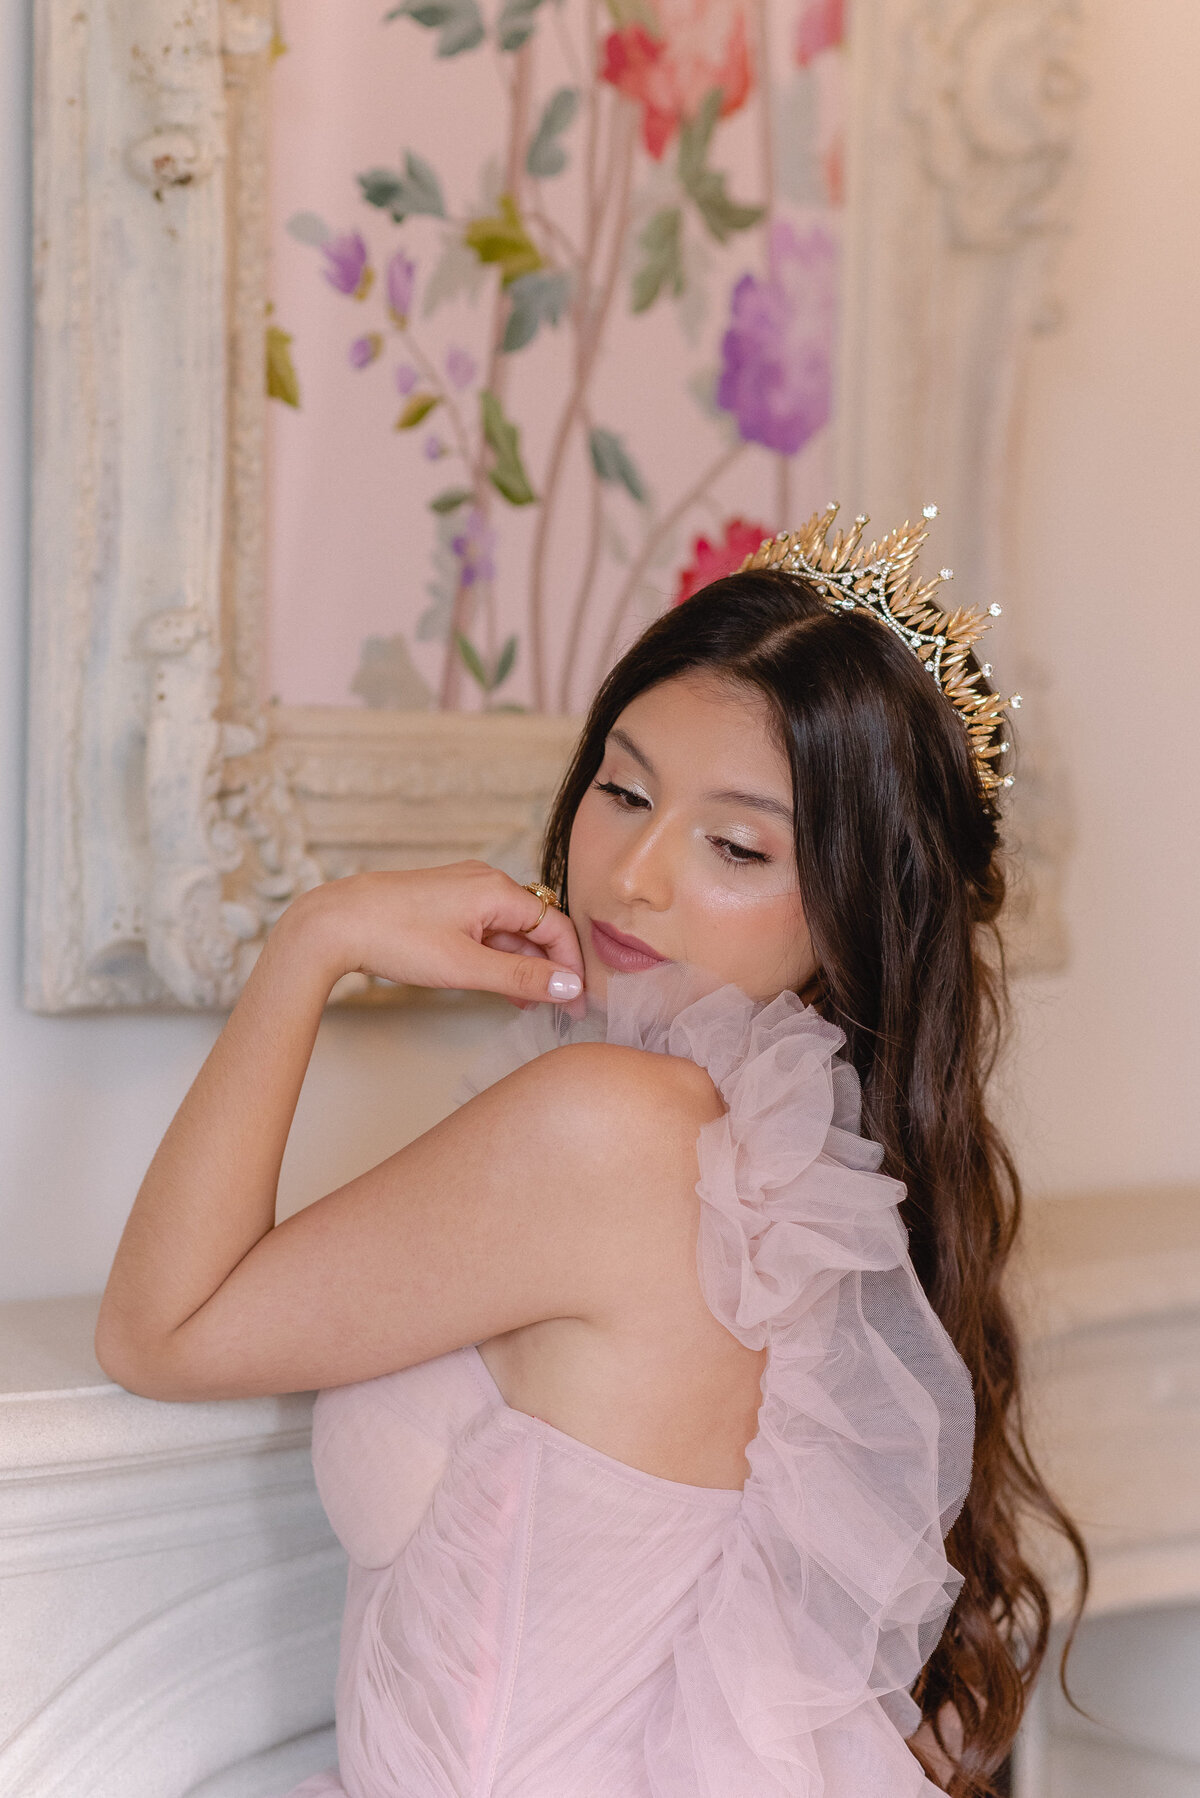 Lilly Bridal Artistry - Quinceanera Hair and Makeup Artist - Spring, Texas